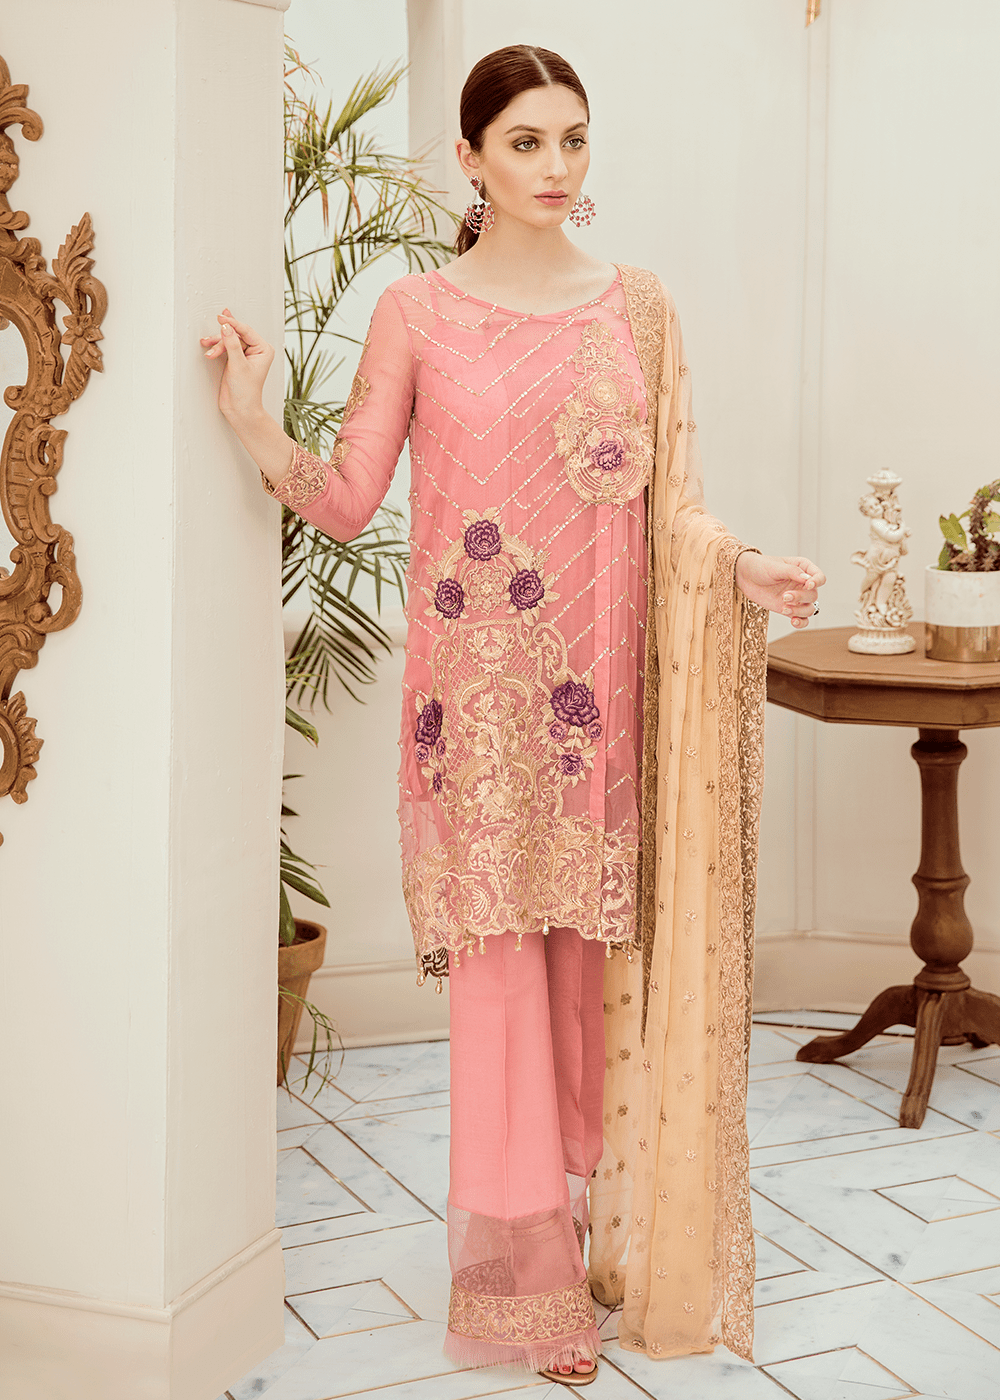 09 Regal Rose (Afrozeh - Riona Collection 2019)